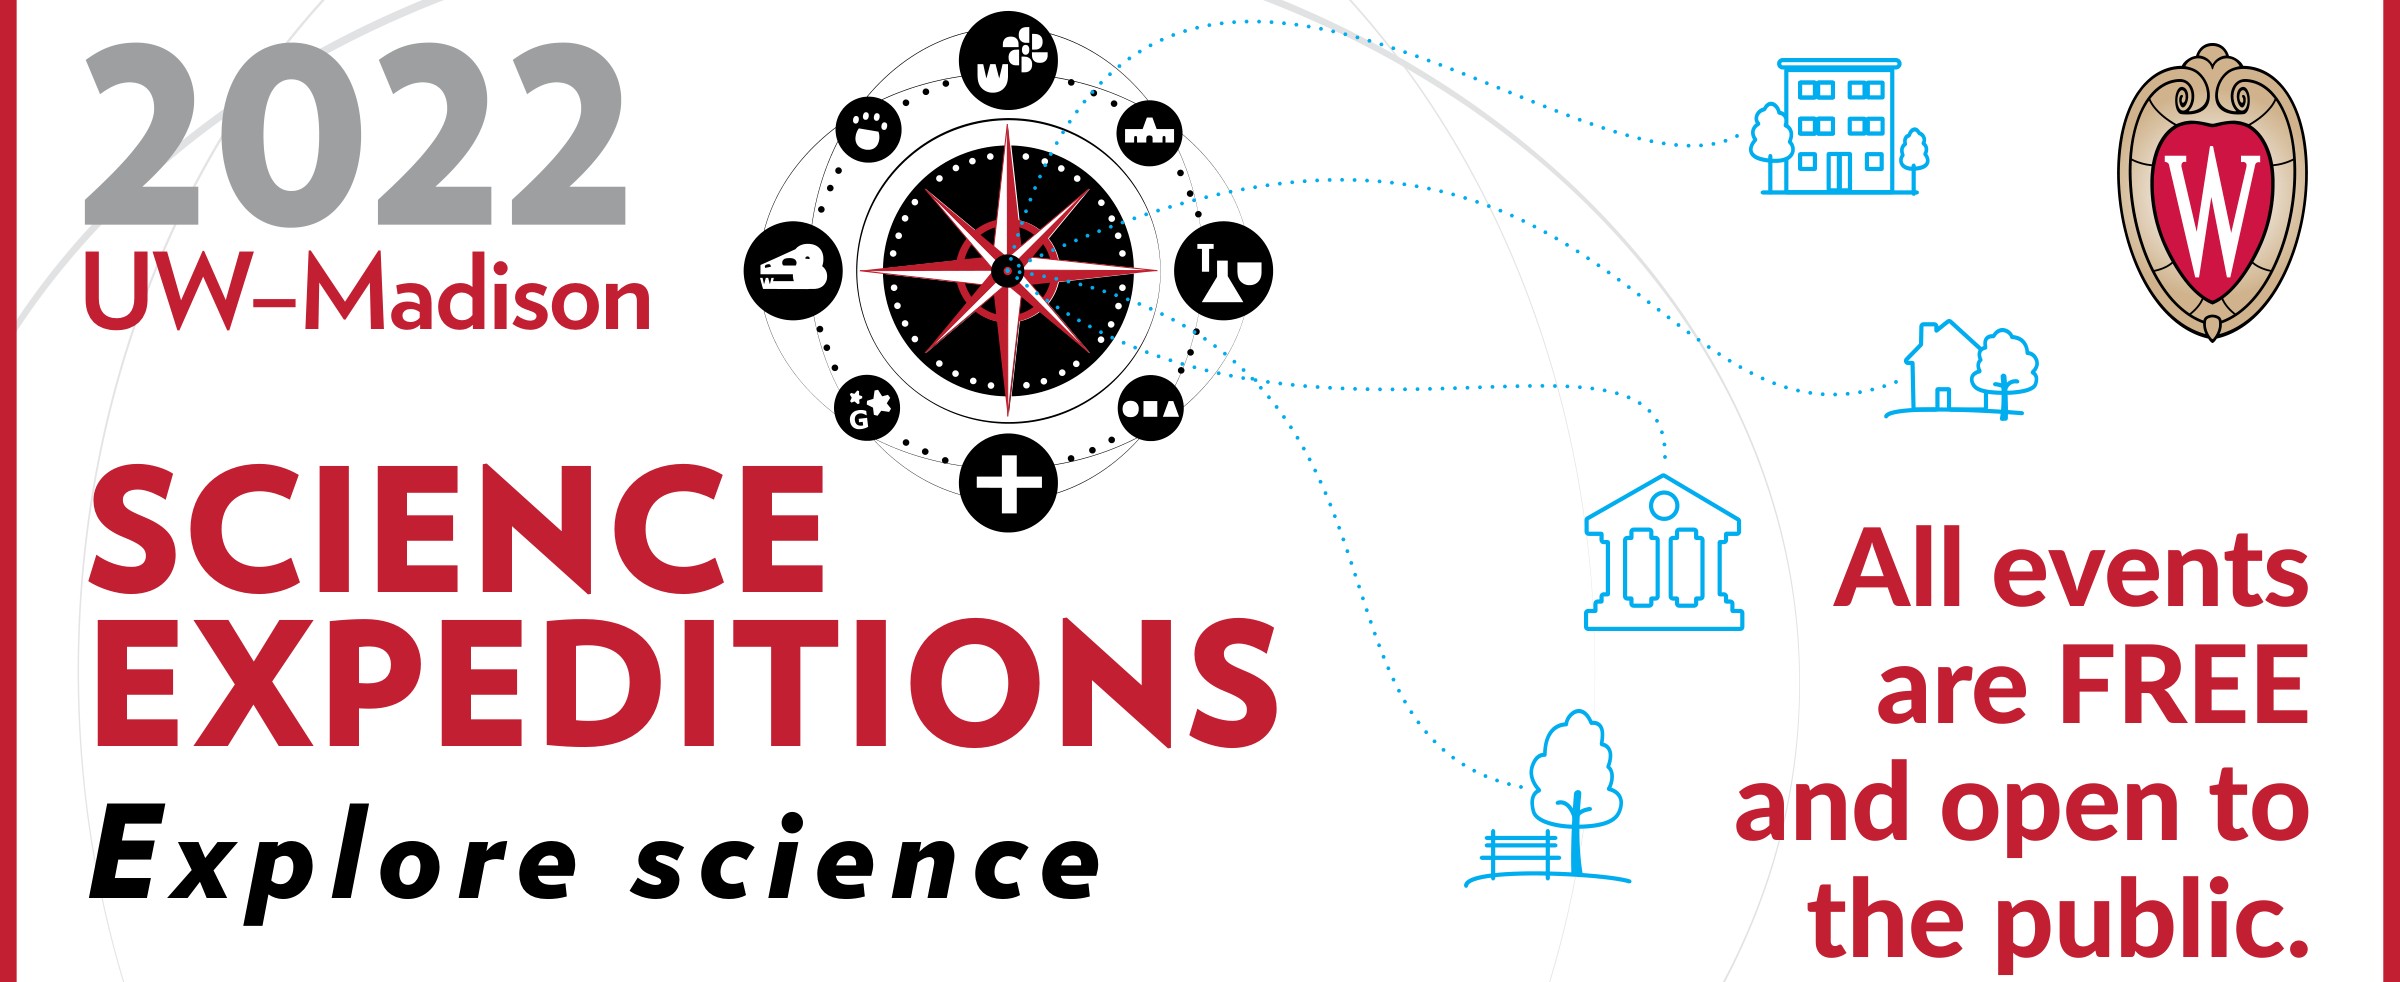 Banner image with compass logo for UW Science Expeditions